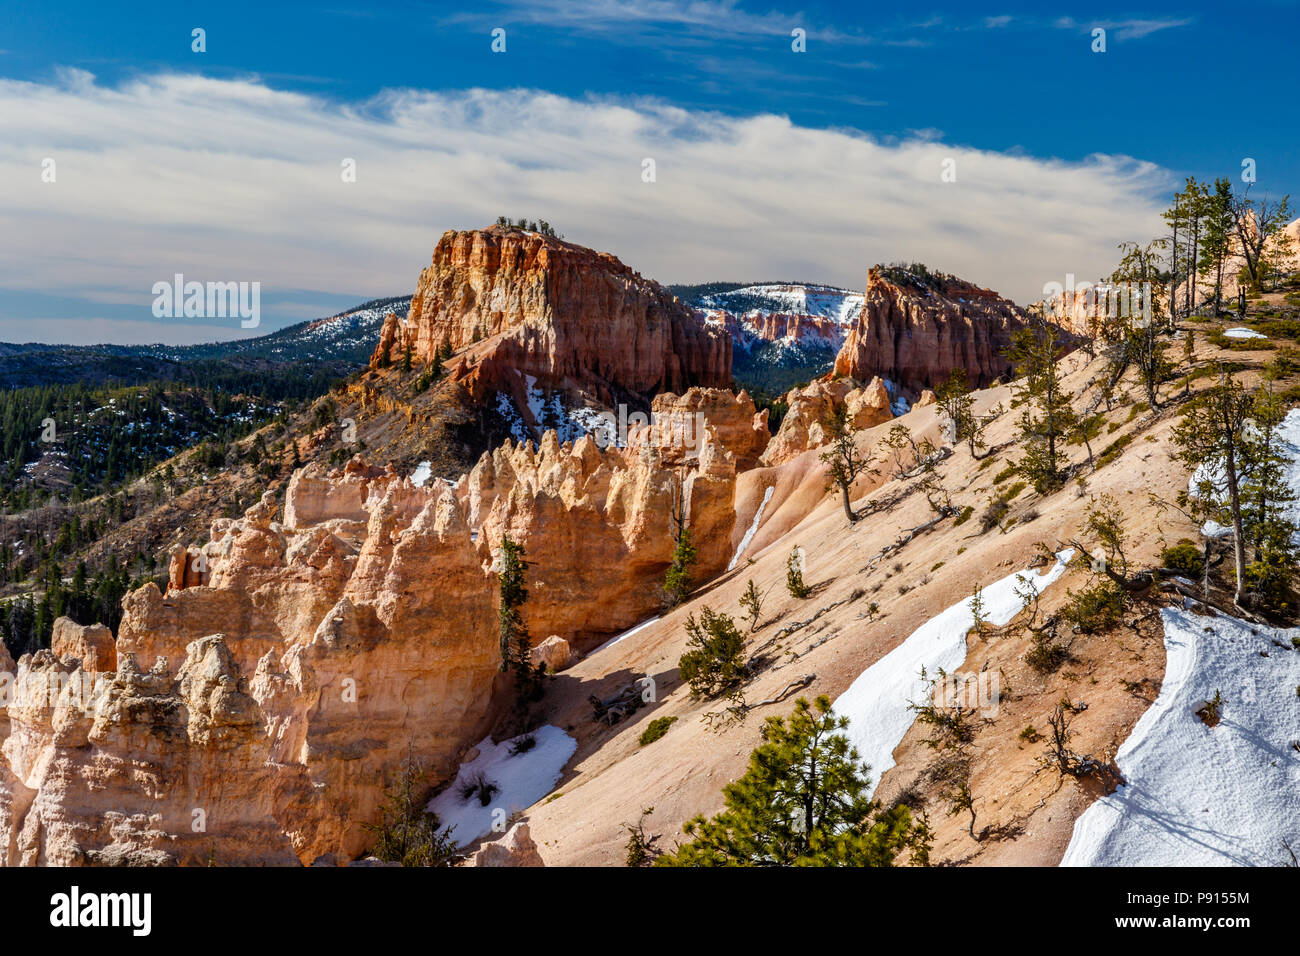 Winter view of Swamp Canyon & Butte in Bryce Canyon National Park, Utah. Clouds break up the blue sky. Stock Photo